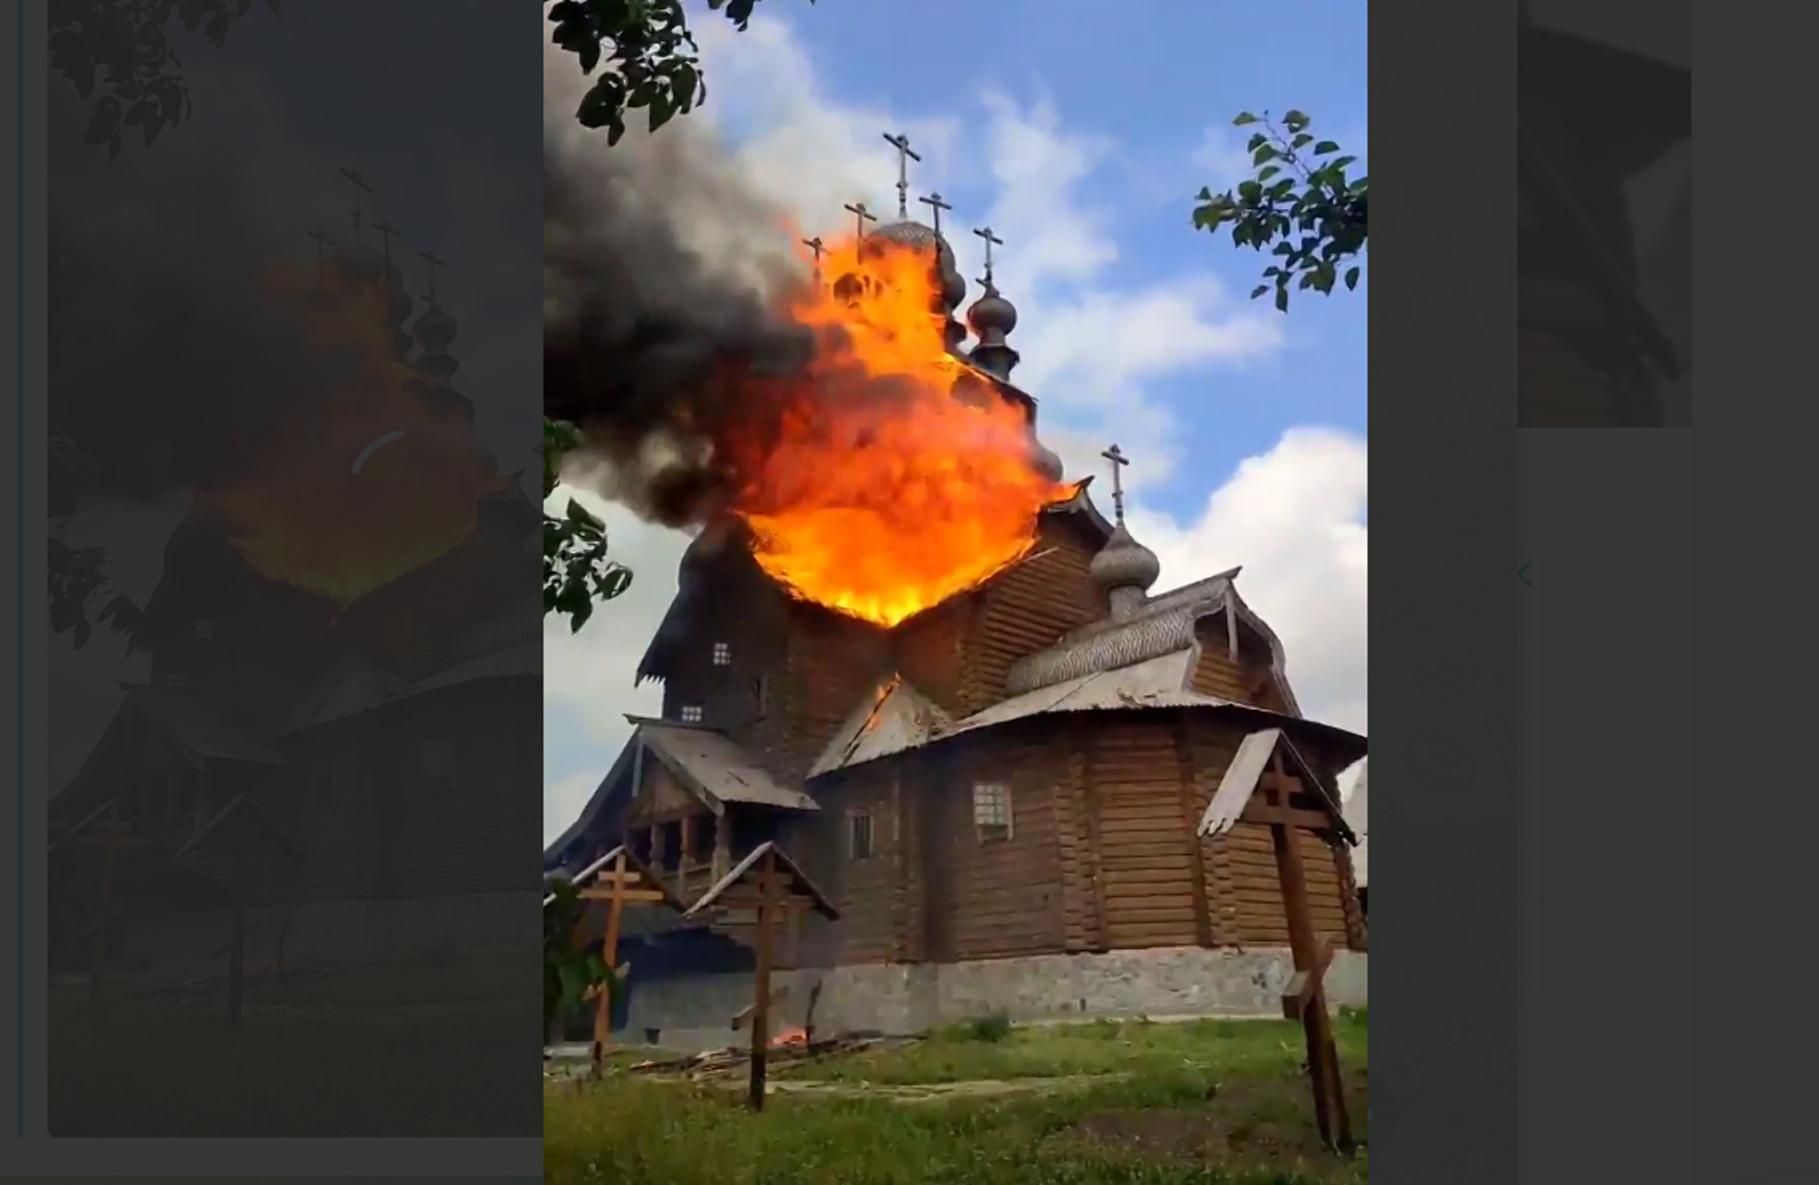 Russian troops fired the All Saints Skete of the Holy Dormition Sviatohirsk Lavra - en